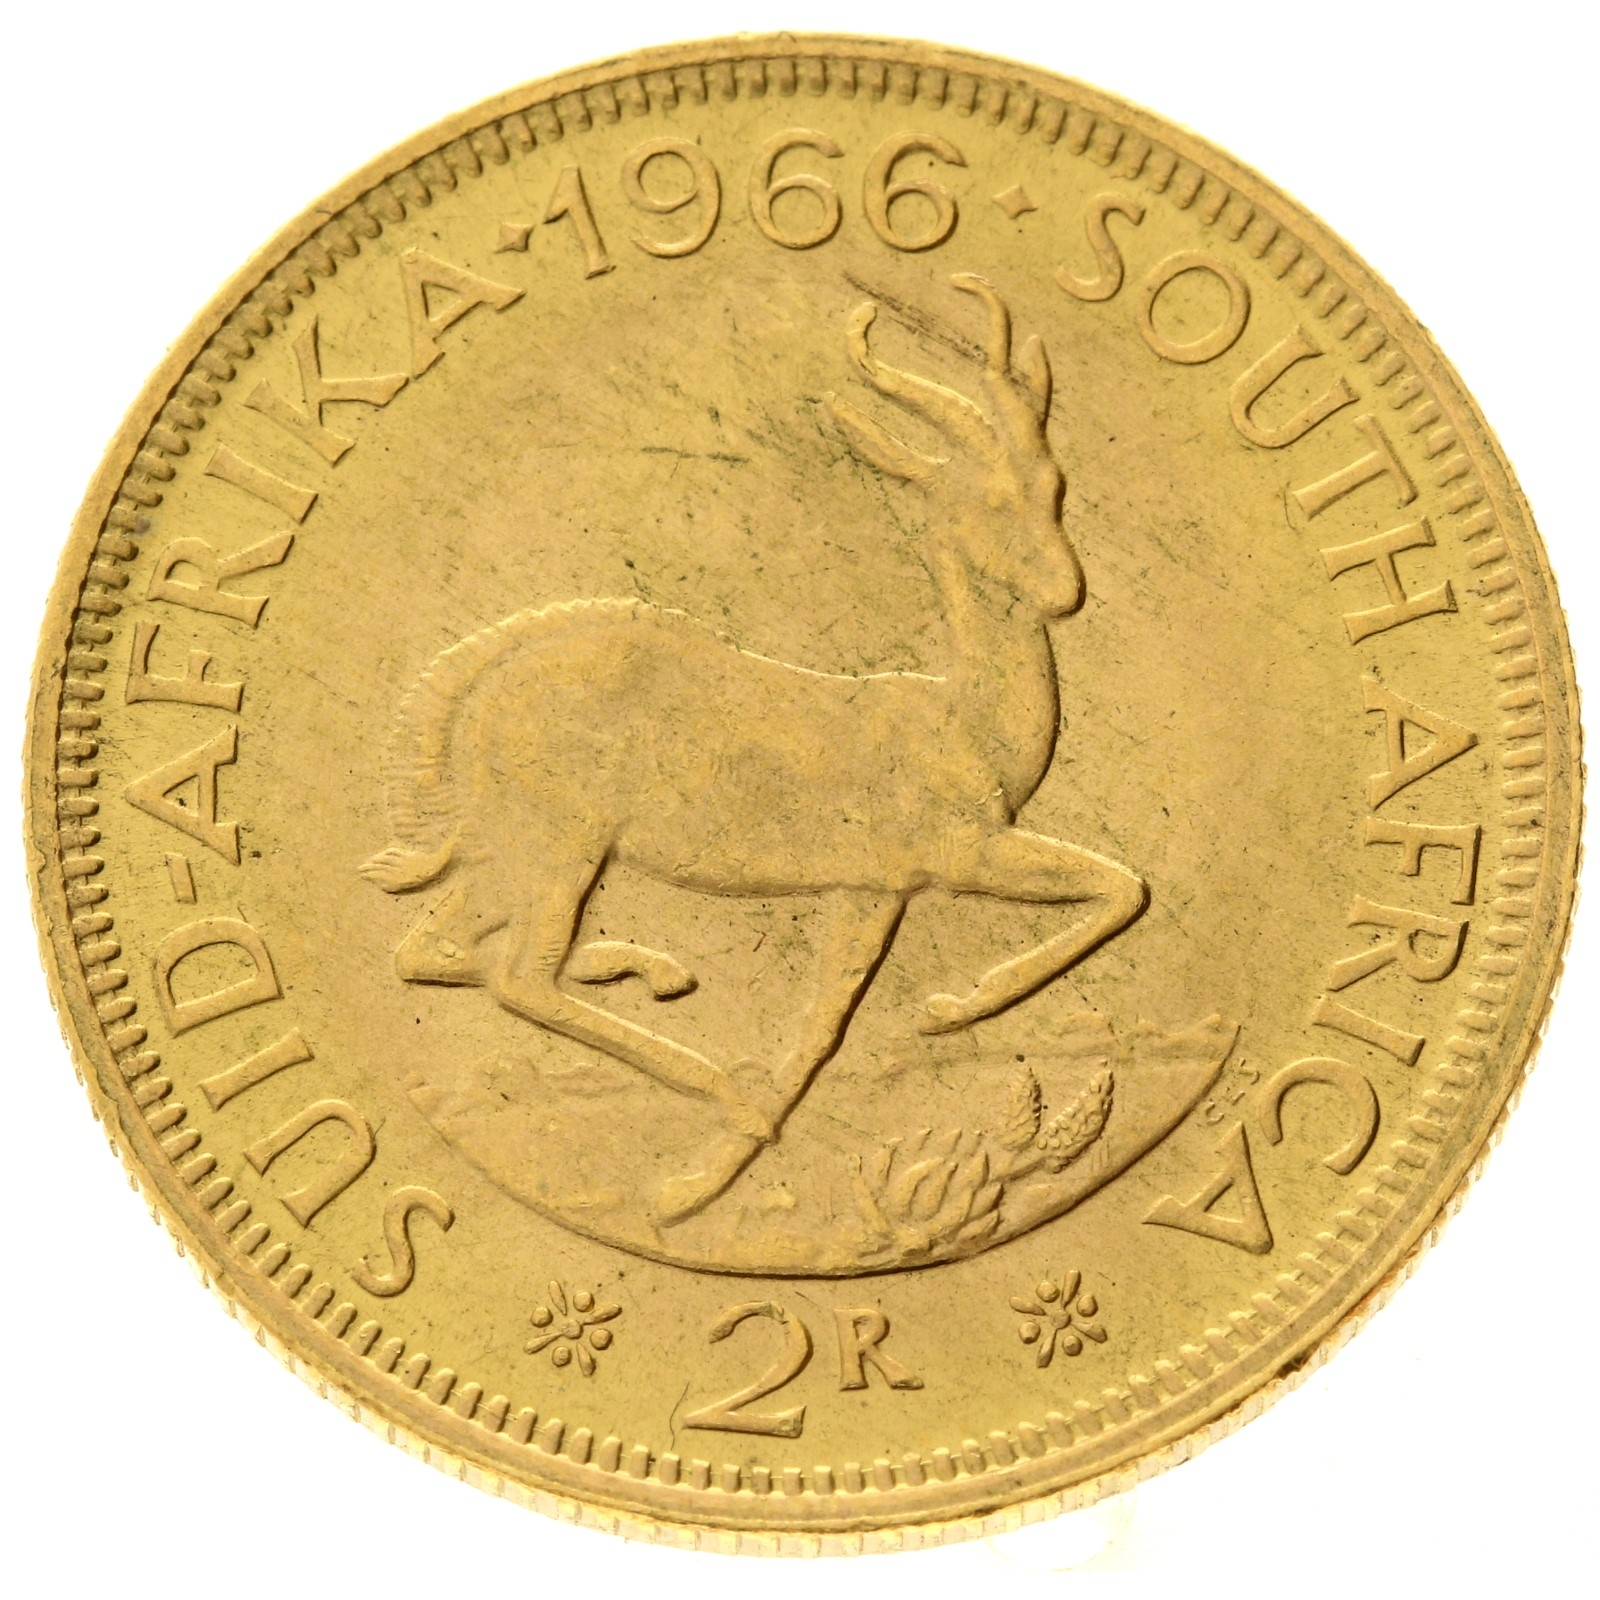 South Africa - 2 rand - 1966